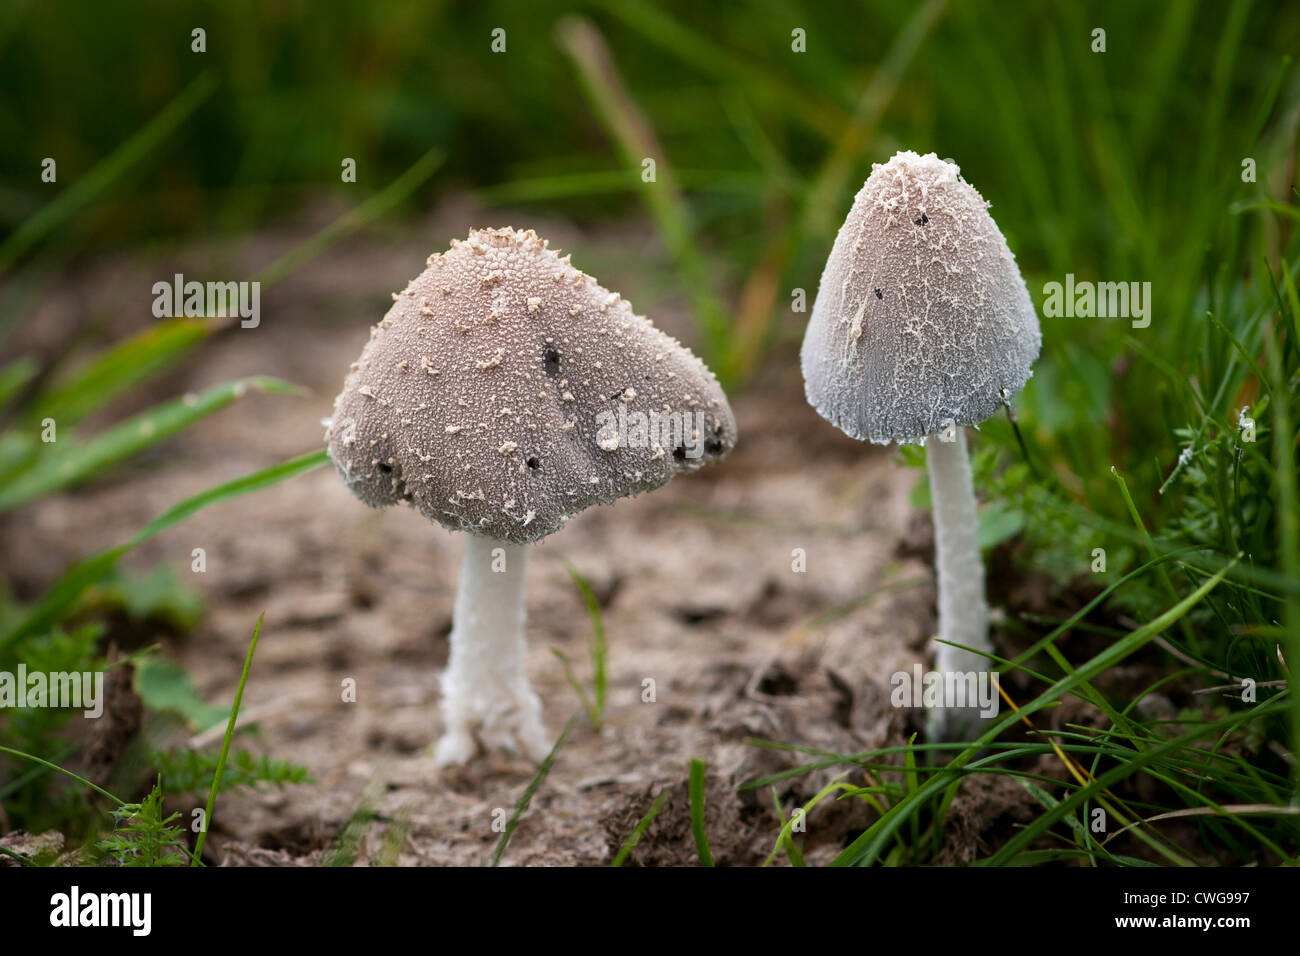 Coprinus species, probably Coprinus Narcoticus, growing on cow dung. Stock Photo